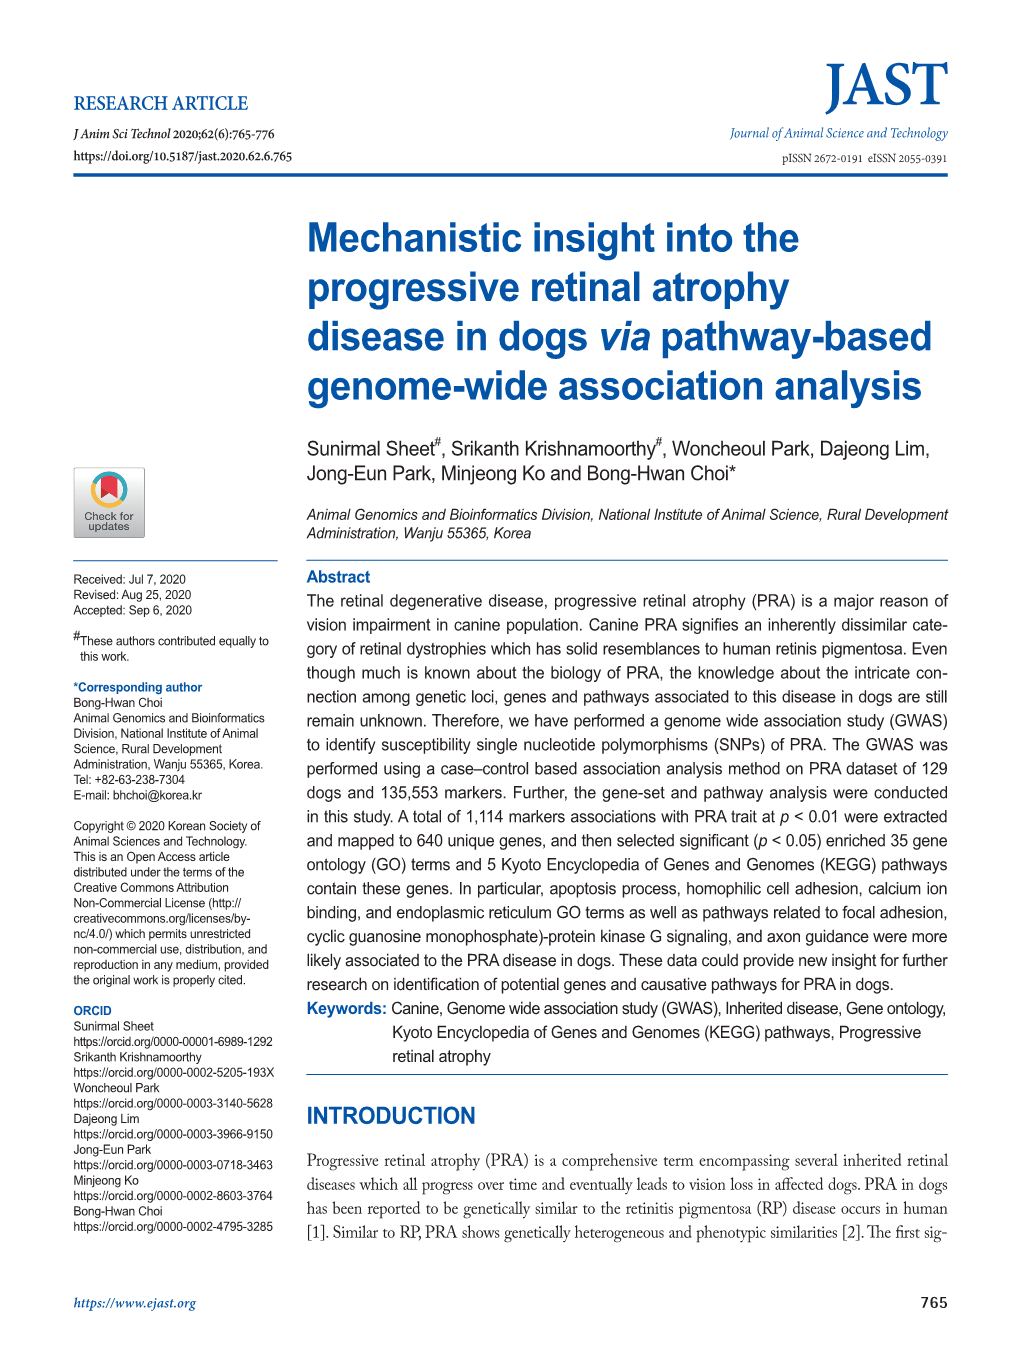 Mechanistic Insight Into the Progressive Retinal Atrophy Disease in Dogs Via Pathway-Based Genome-Wide Association Analysis